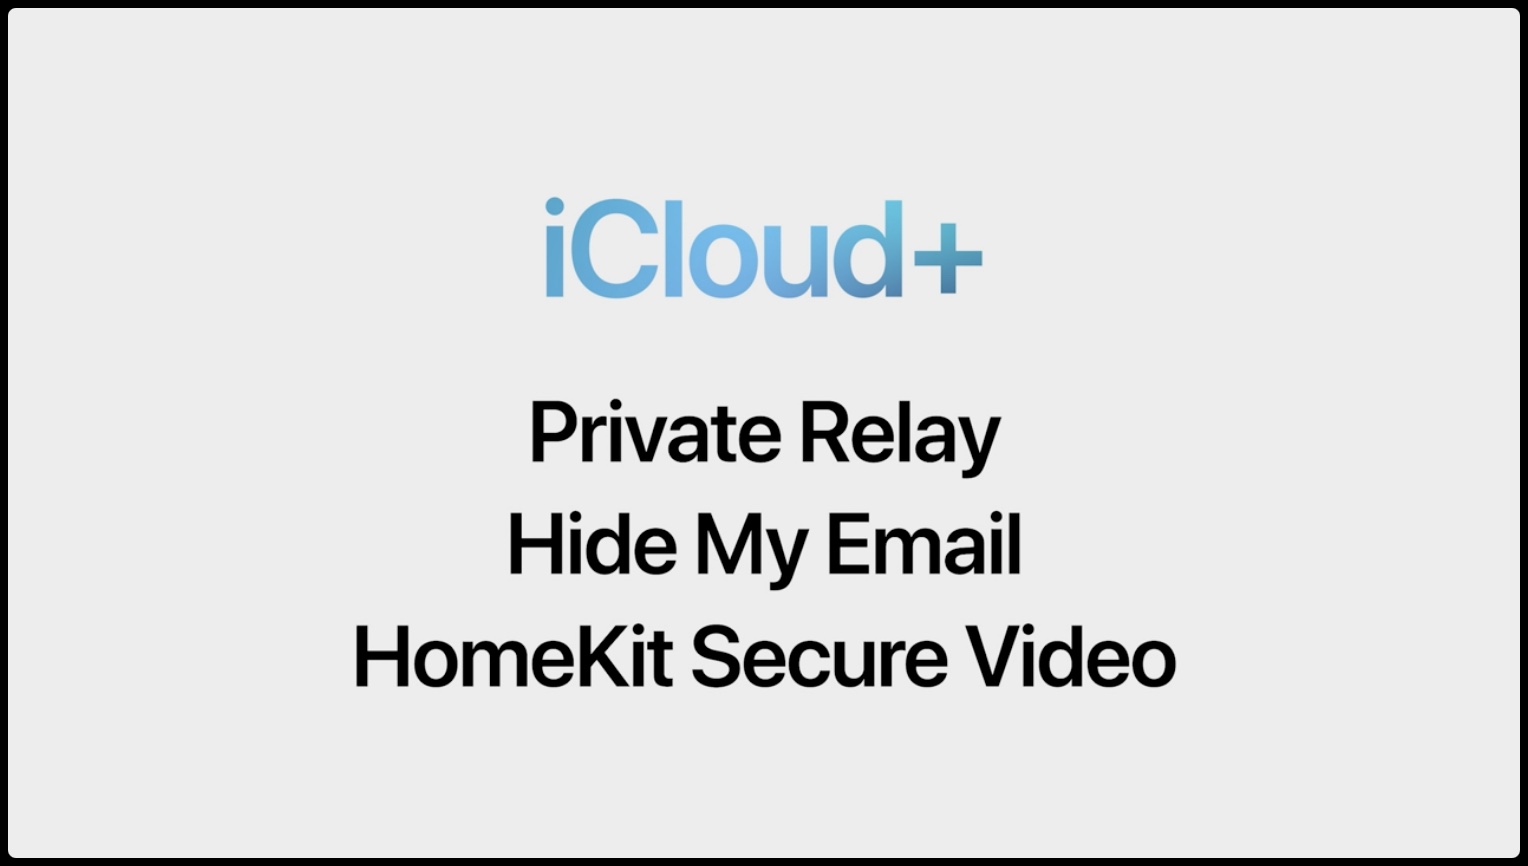 Apple's WWDC21 slide listing iCloud+ features like iCloud Private Relay, Hide My Email, and HomeKit Secure Video